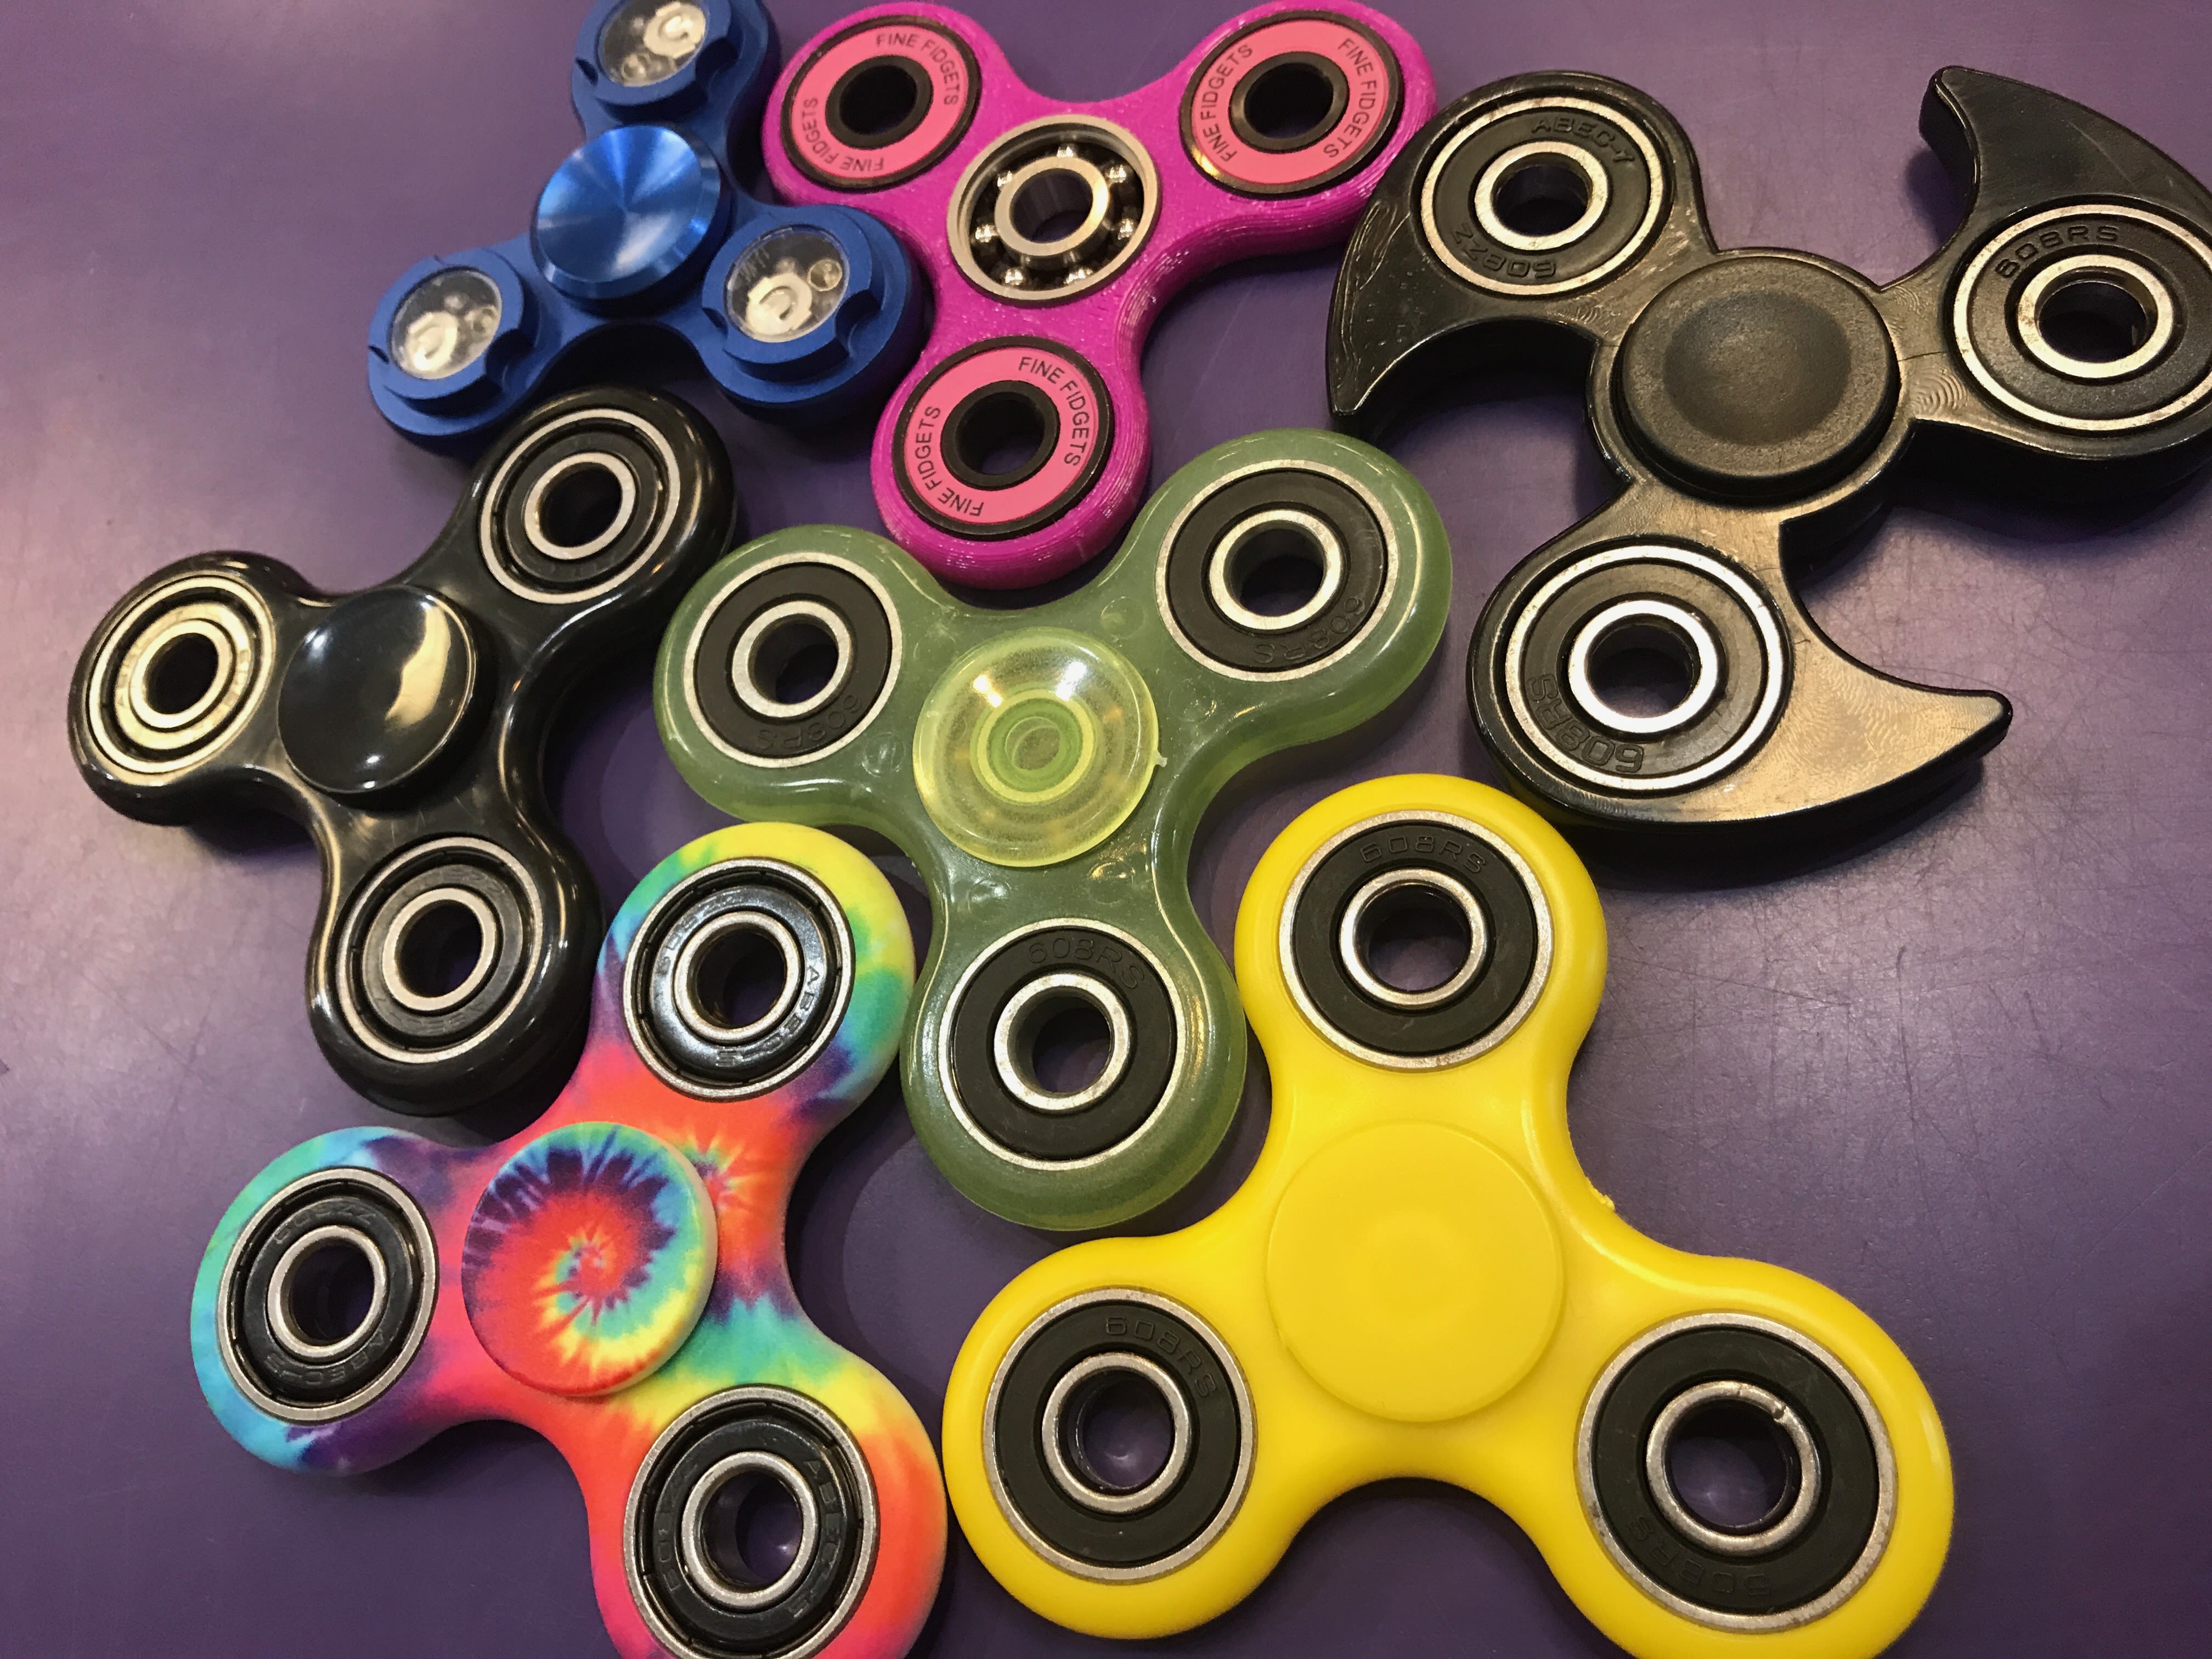 spinner fad: Adults get and that's the point CNN